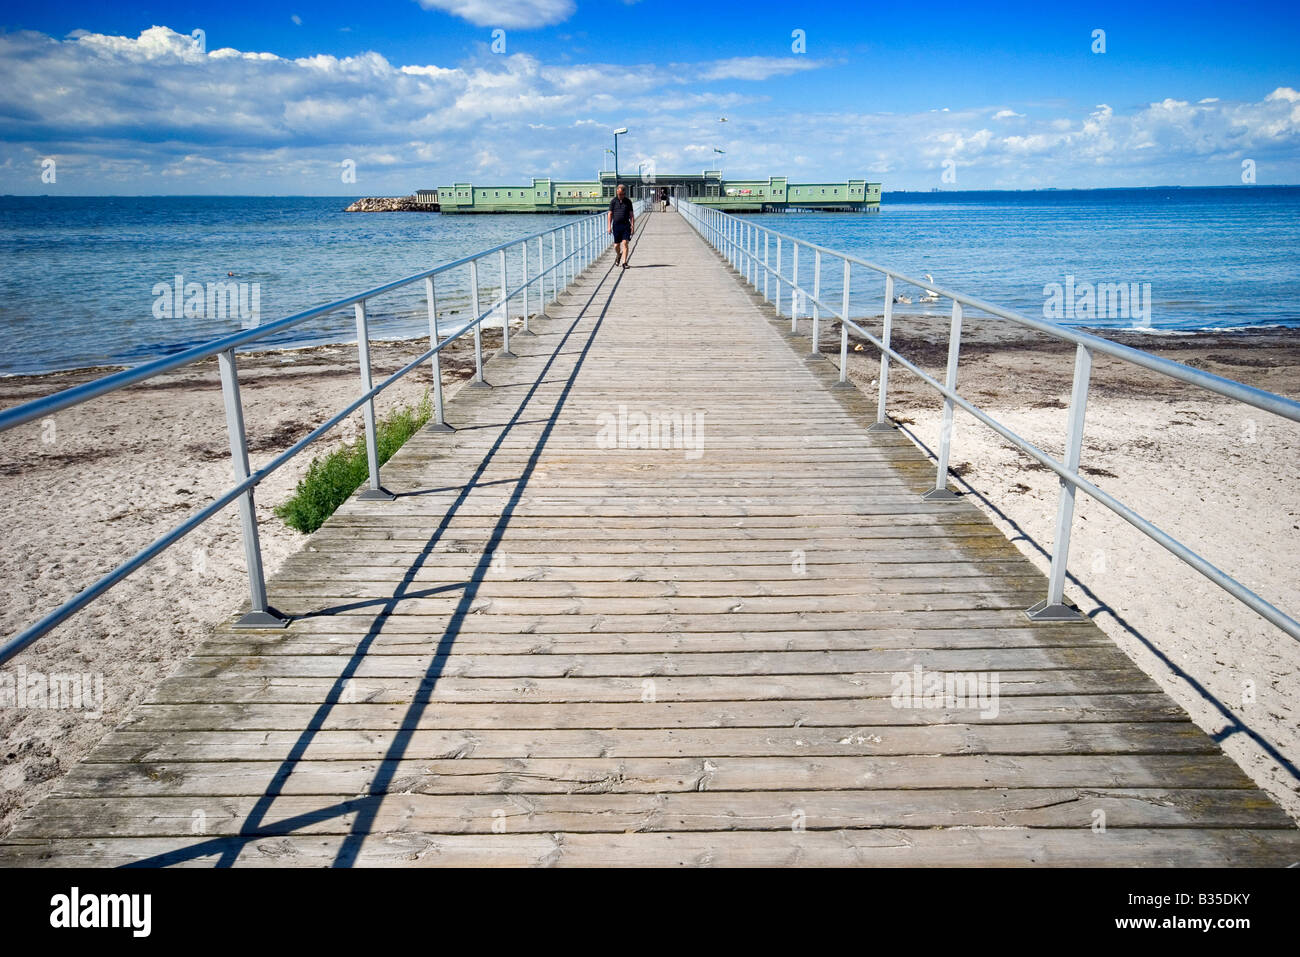 A long wooden pier connects Ribersborg beach in Malmö, Sweden, with the old open-air swimming bath known as Kallbadhuset. Stock Photo